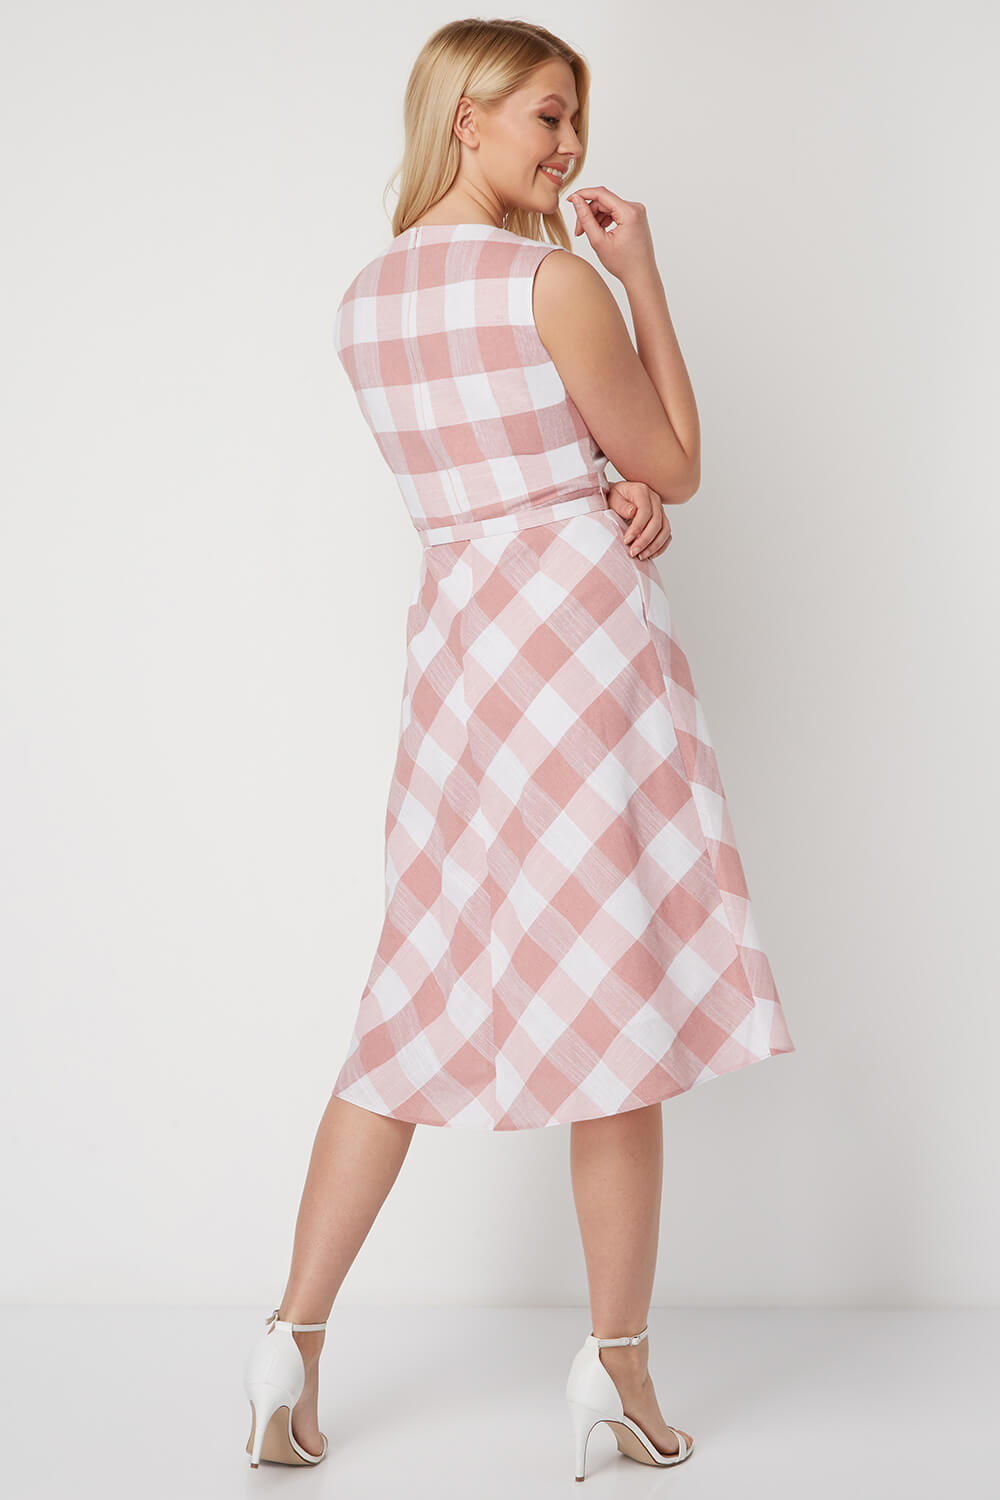 PINK Check Print Fit and Flare Dress, Image 3 of 5